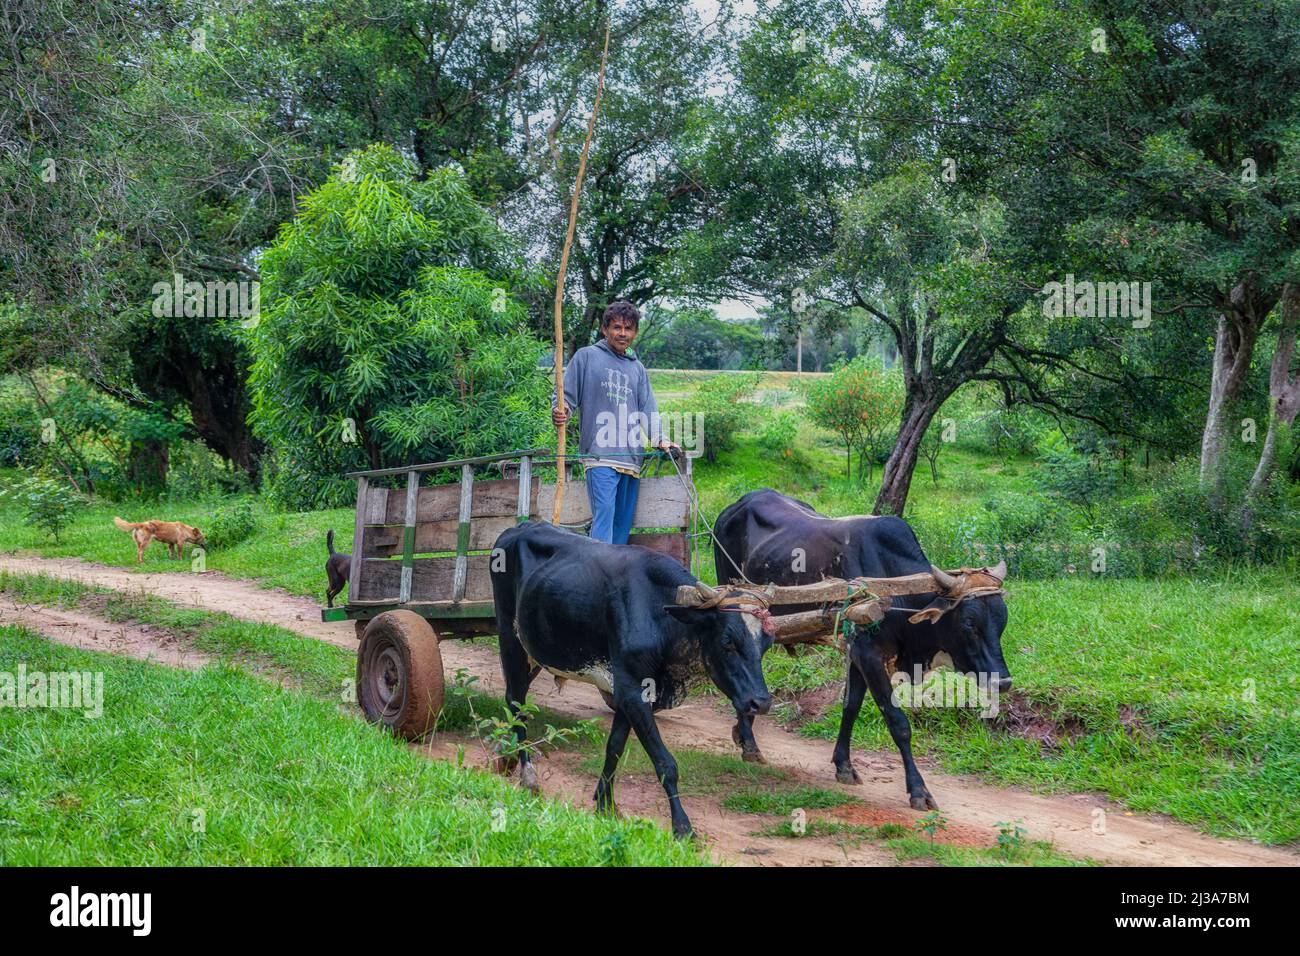 Natalicio Talavera, Guaira, Paraguay - March 19, 2022: A poor farmer and his two dogs with ox cart in the Paraguayan jungle. Stock Photo